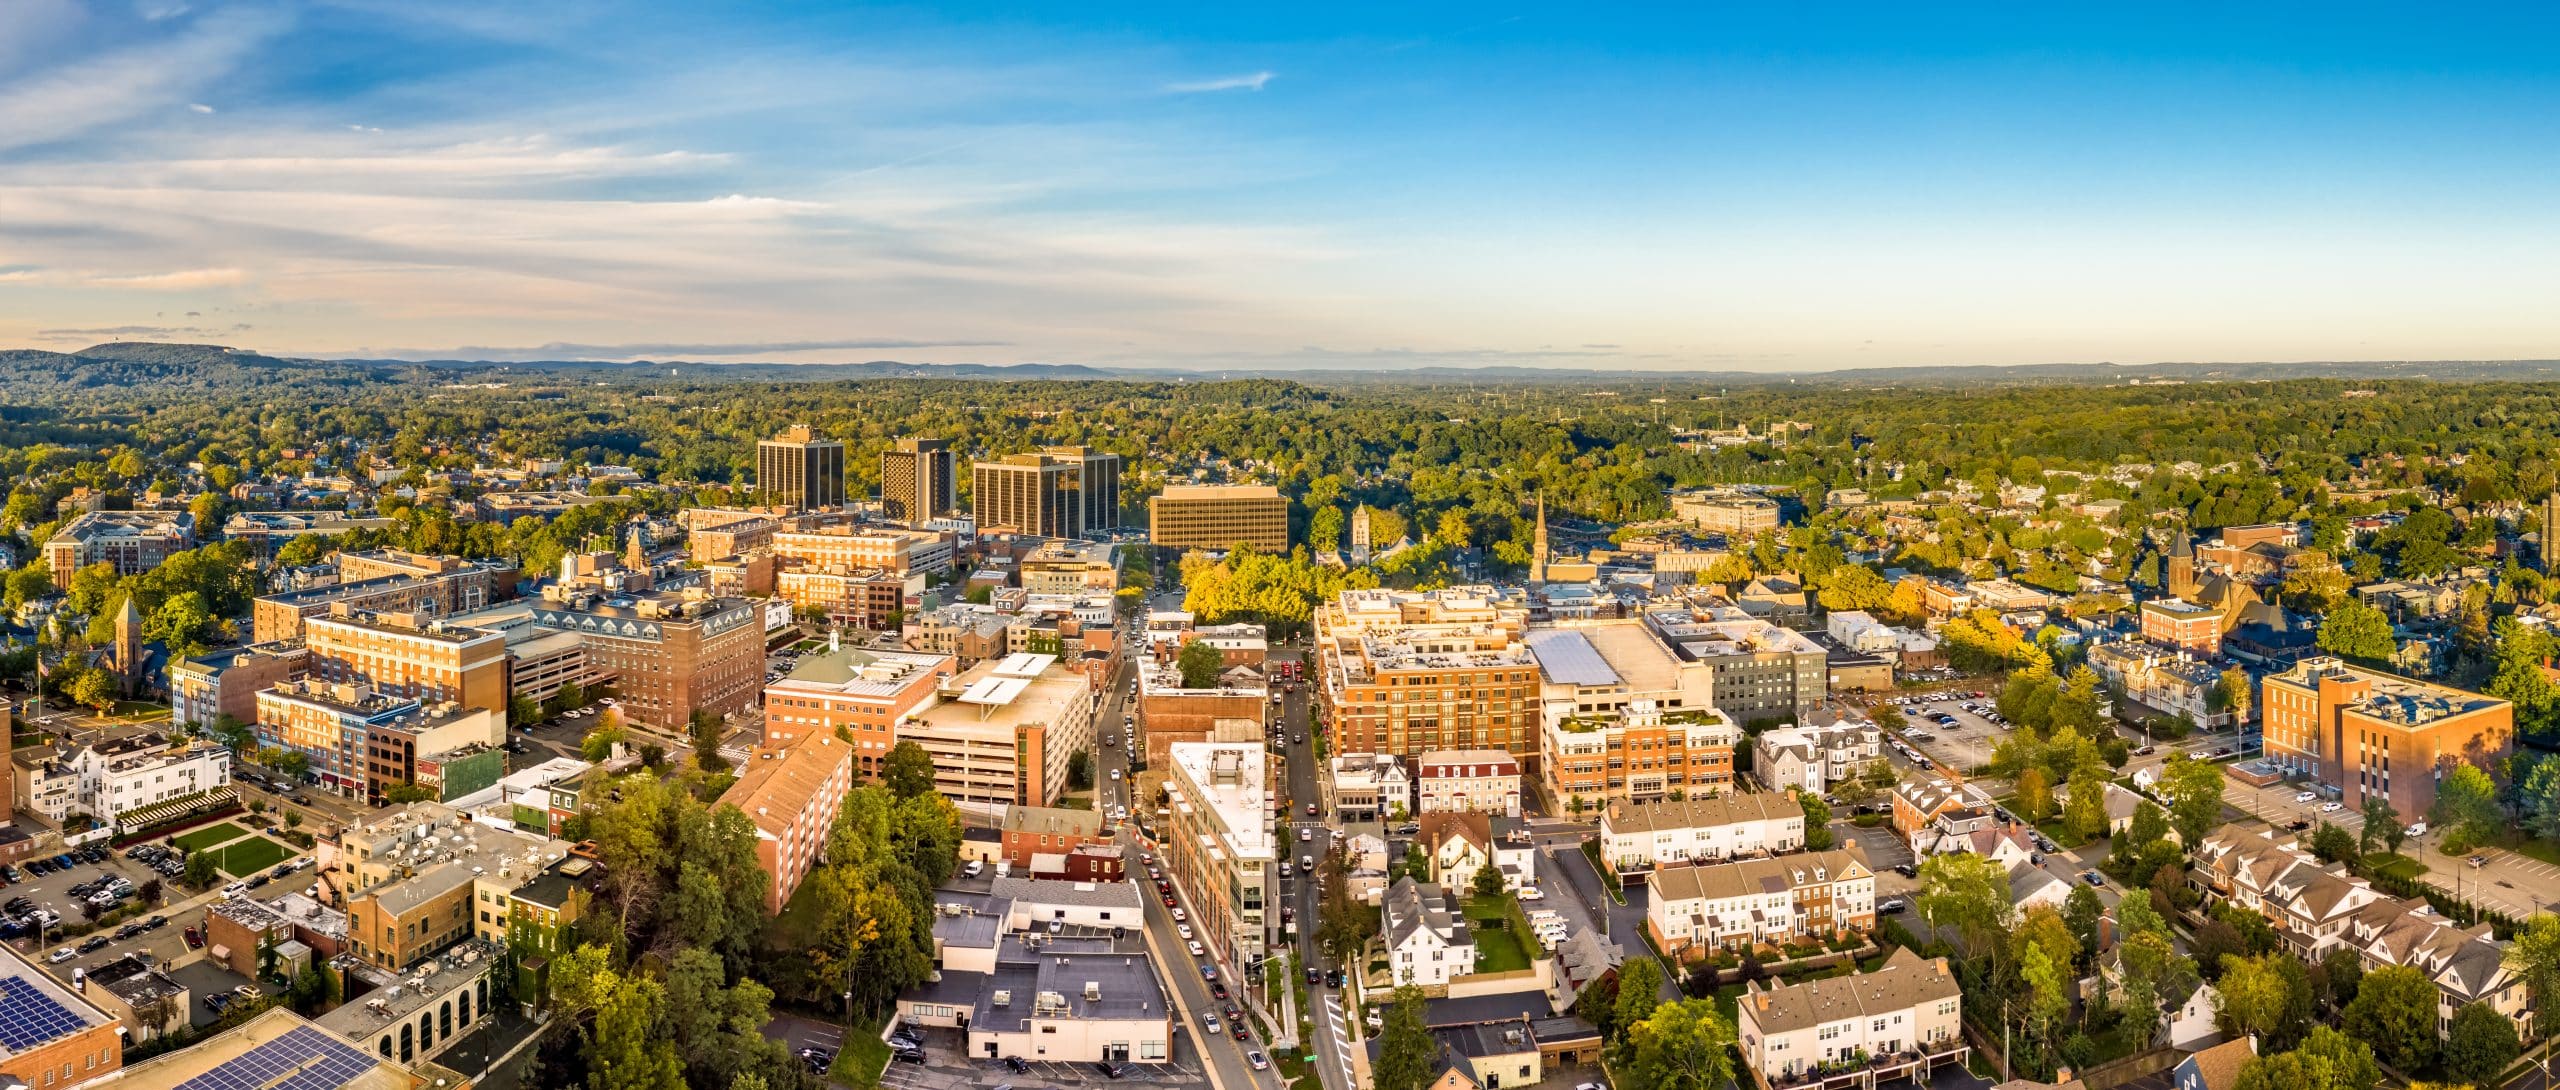 Aerial Cityscape of Morristown, New Jersey